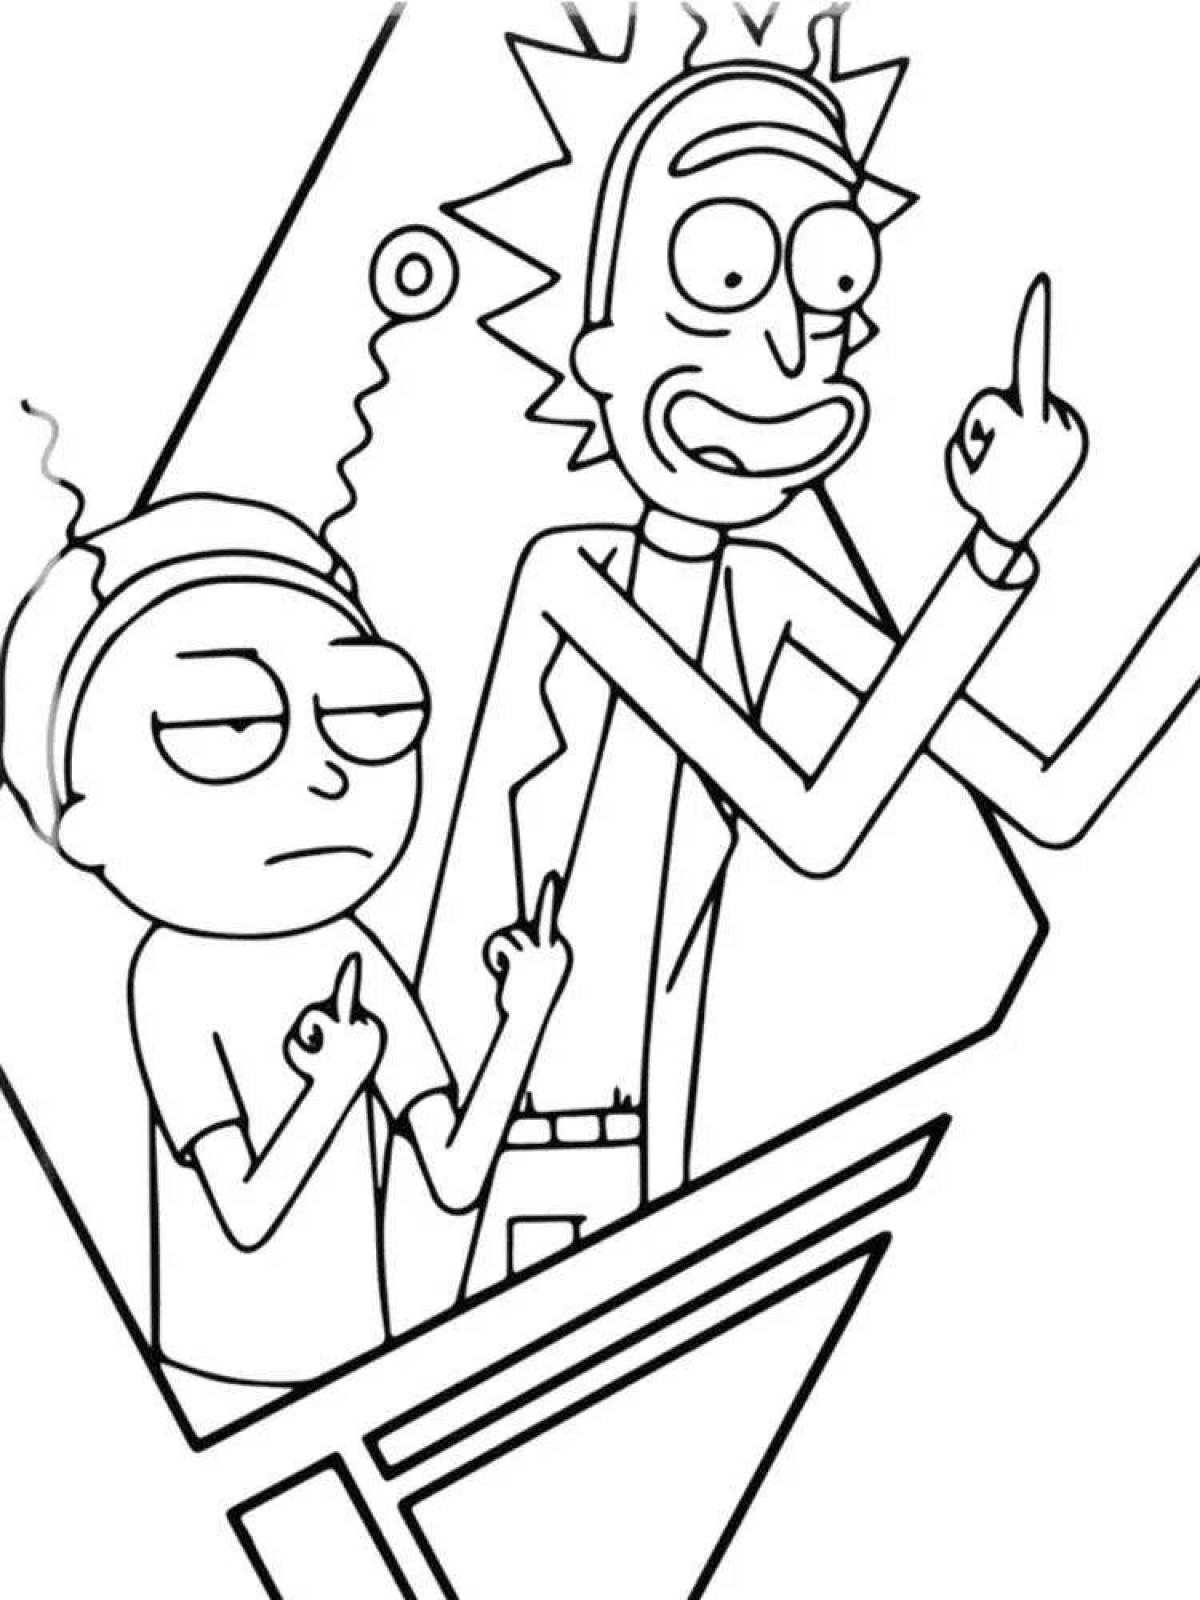 Sparkling morty coloring book